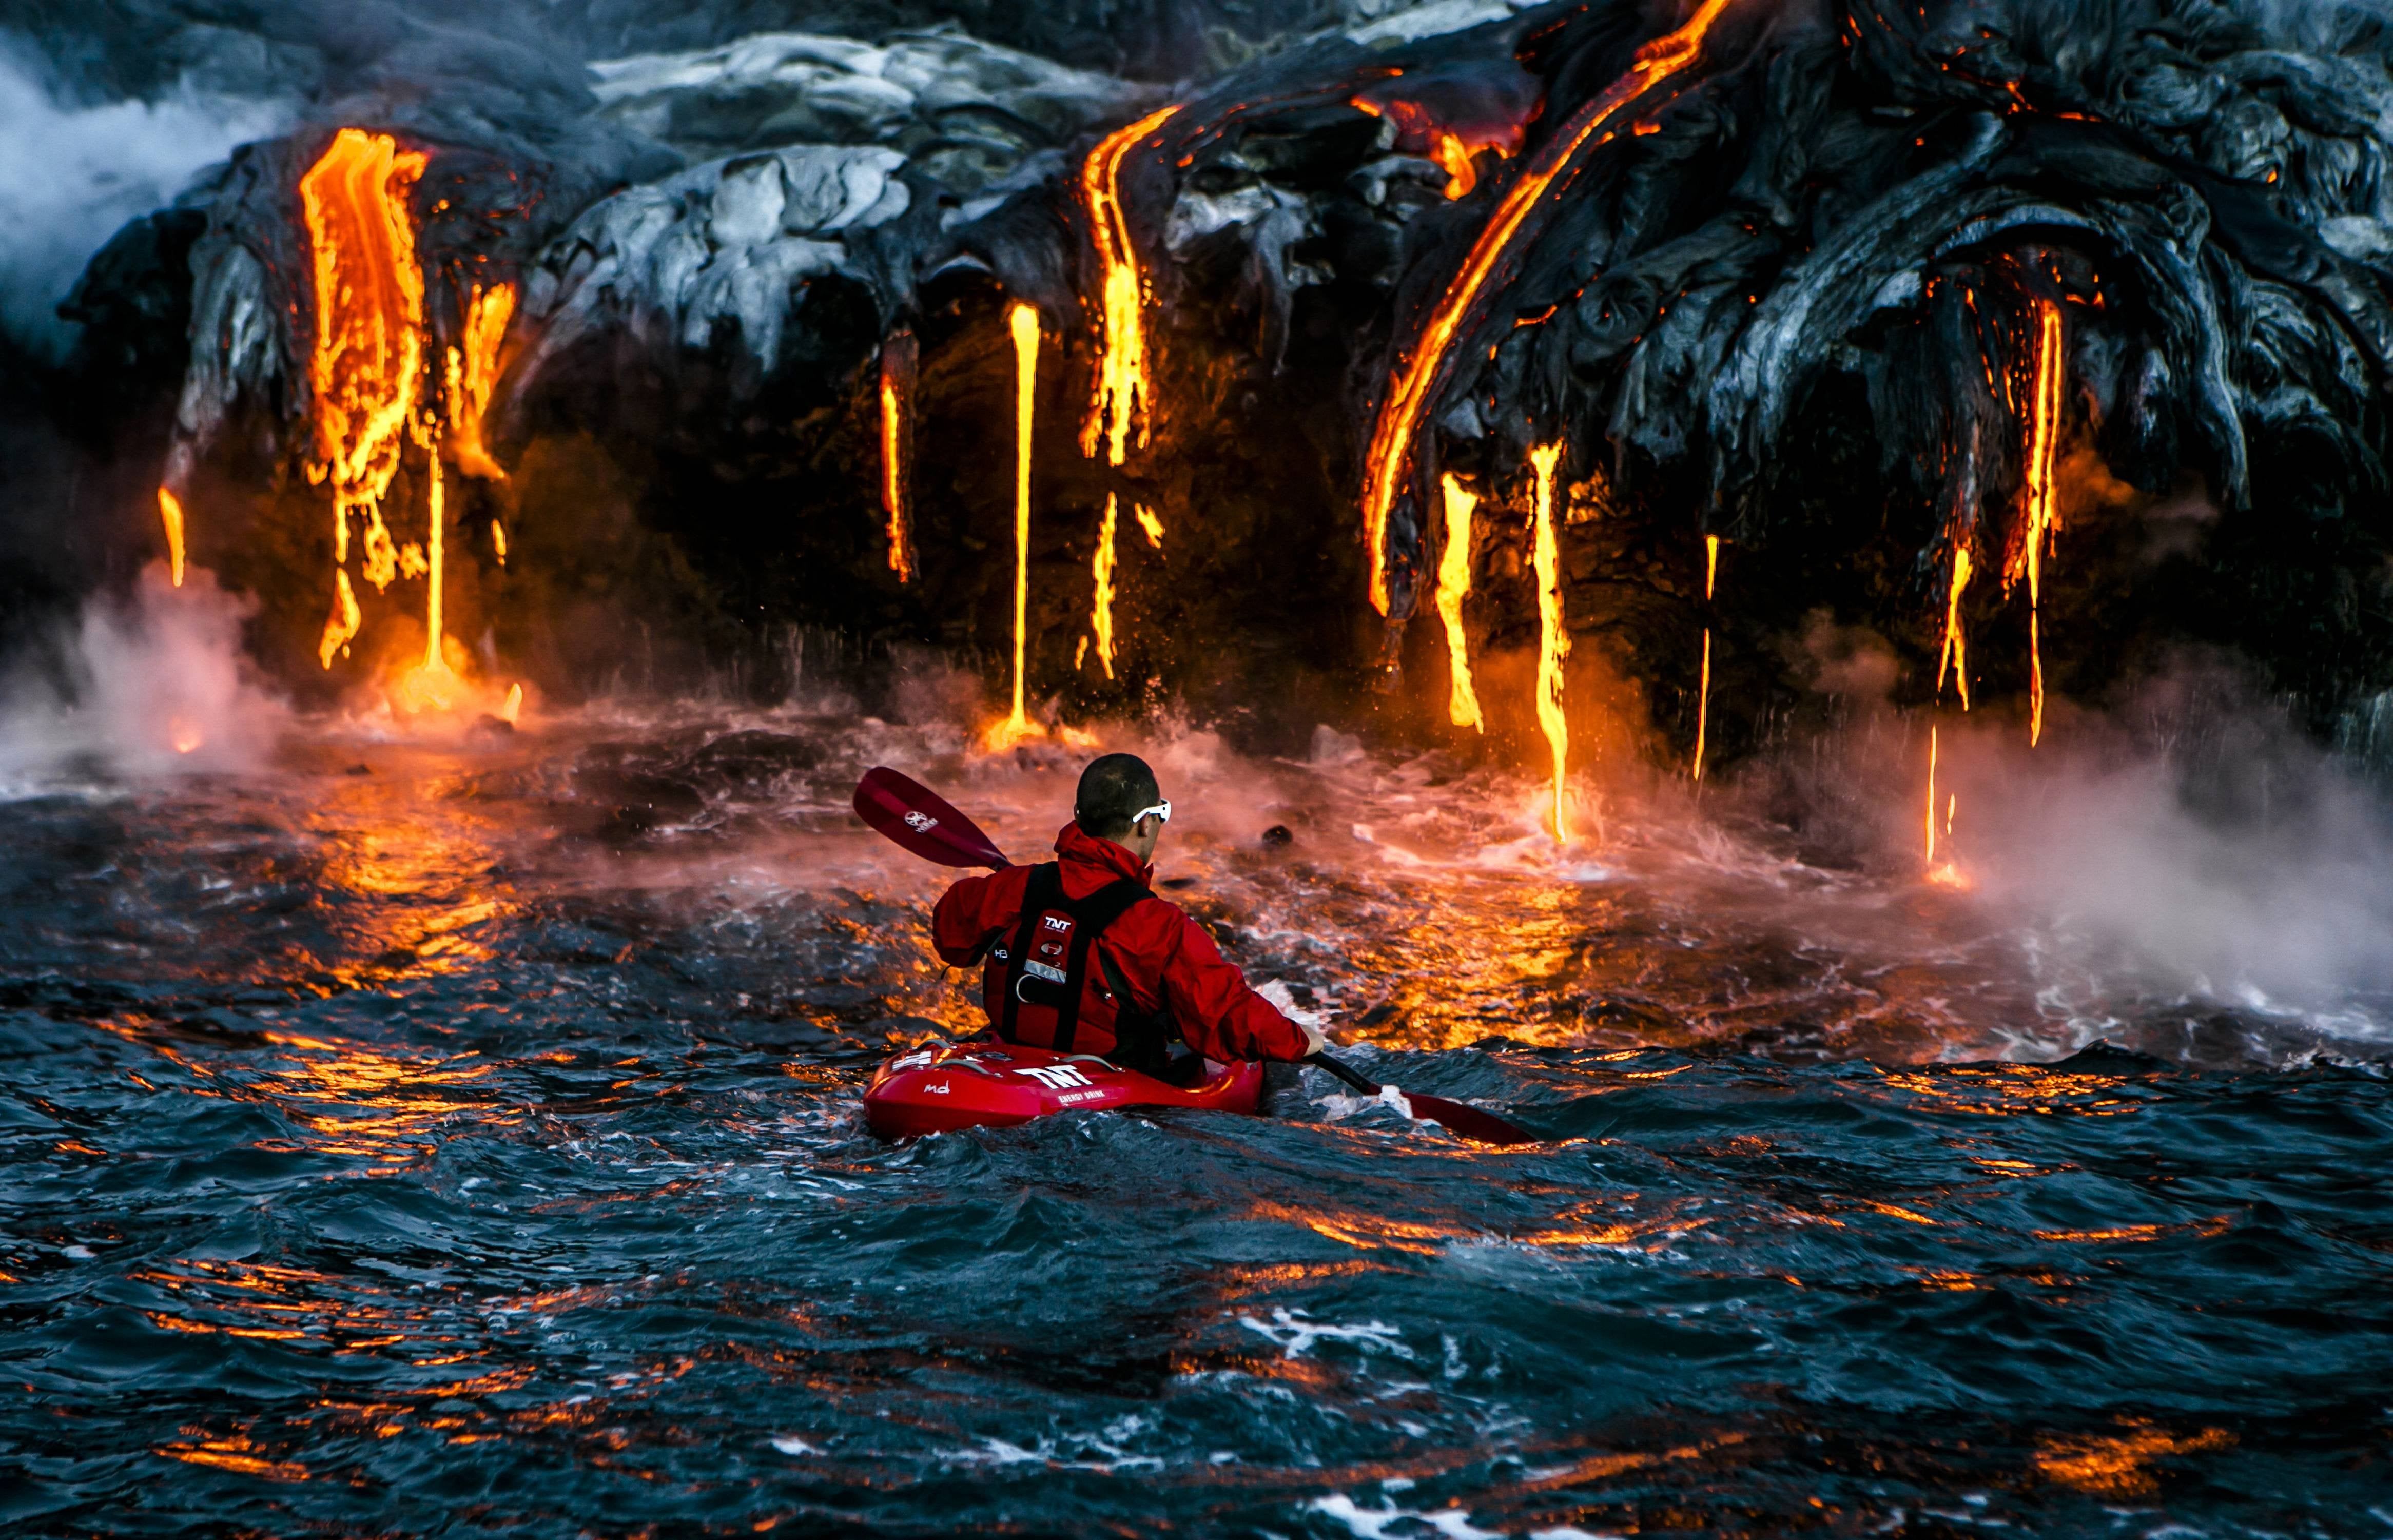 Kayaking With Lava [4663x3001]